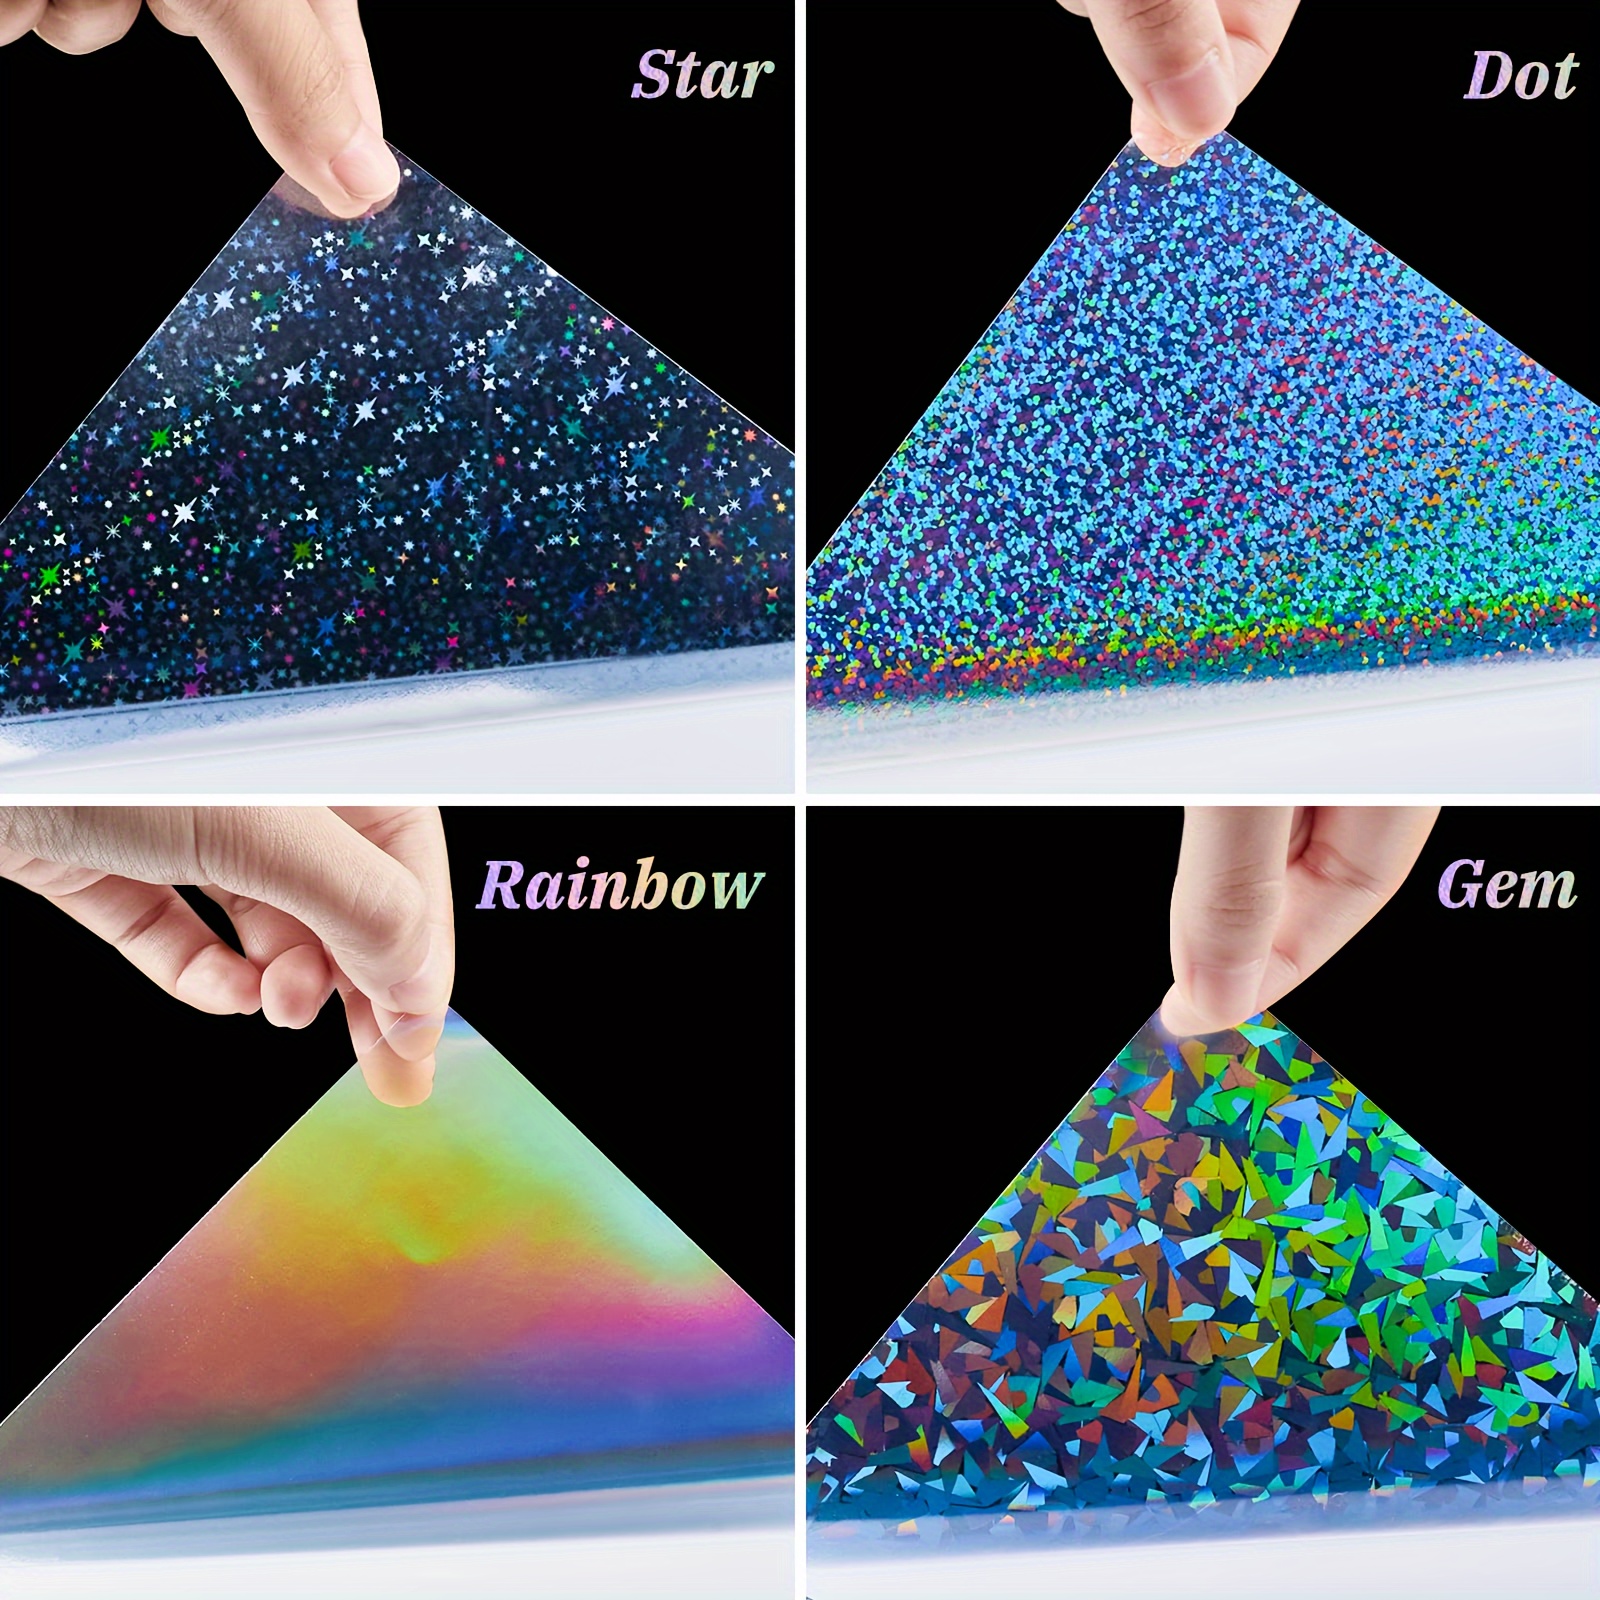 36 Sheets Holographic Sticker Paper, Transparent Holographic Vinyl Laminate  Film, Clear Overlay Lamination Sticker Paper Self Adhesive Waterproof 